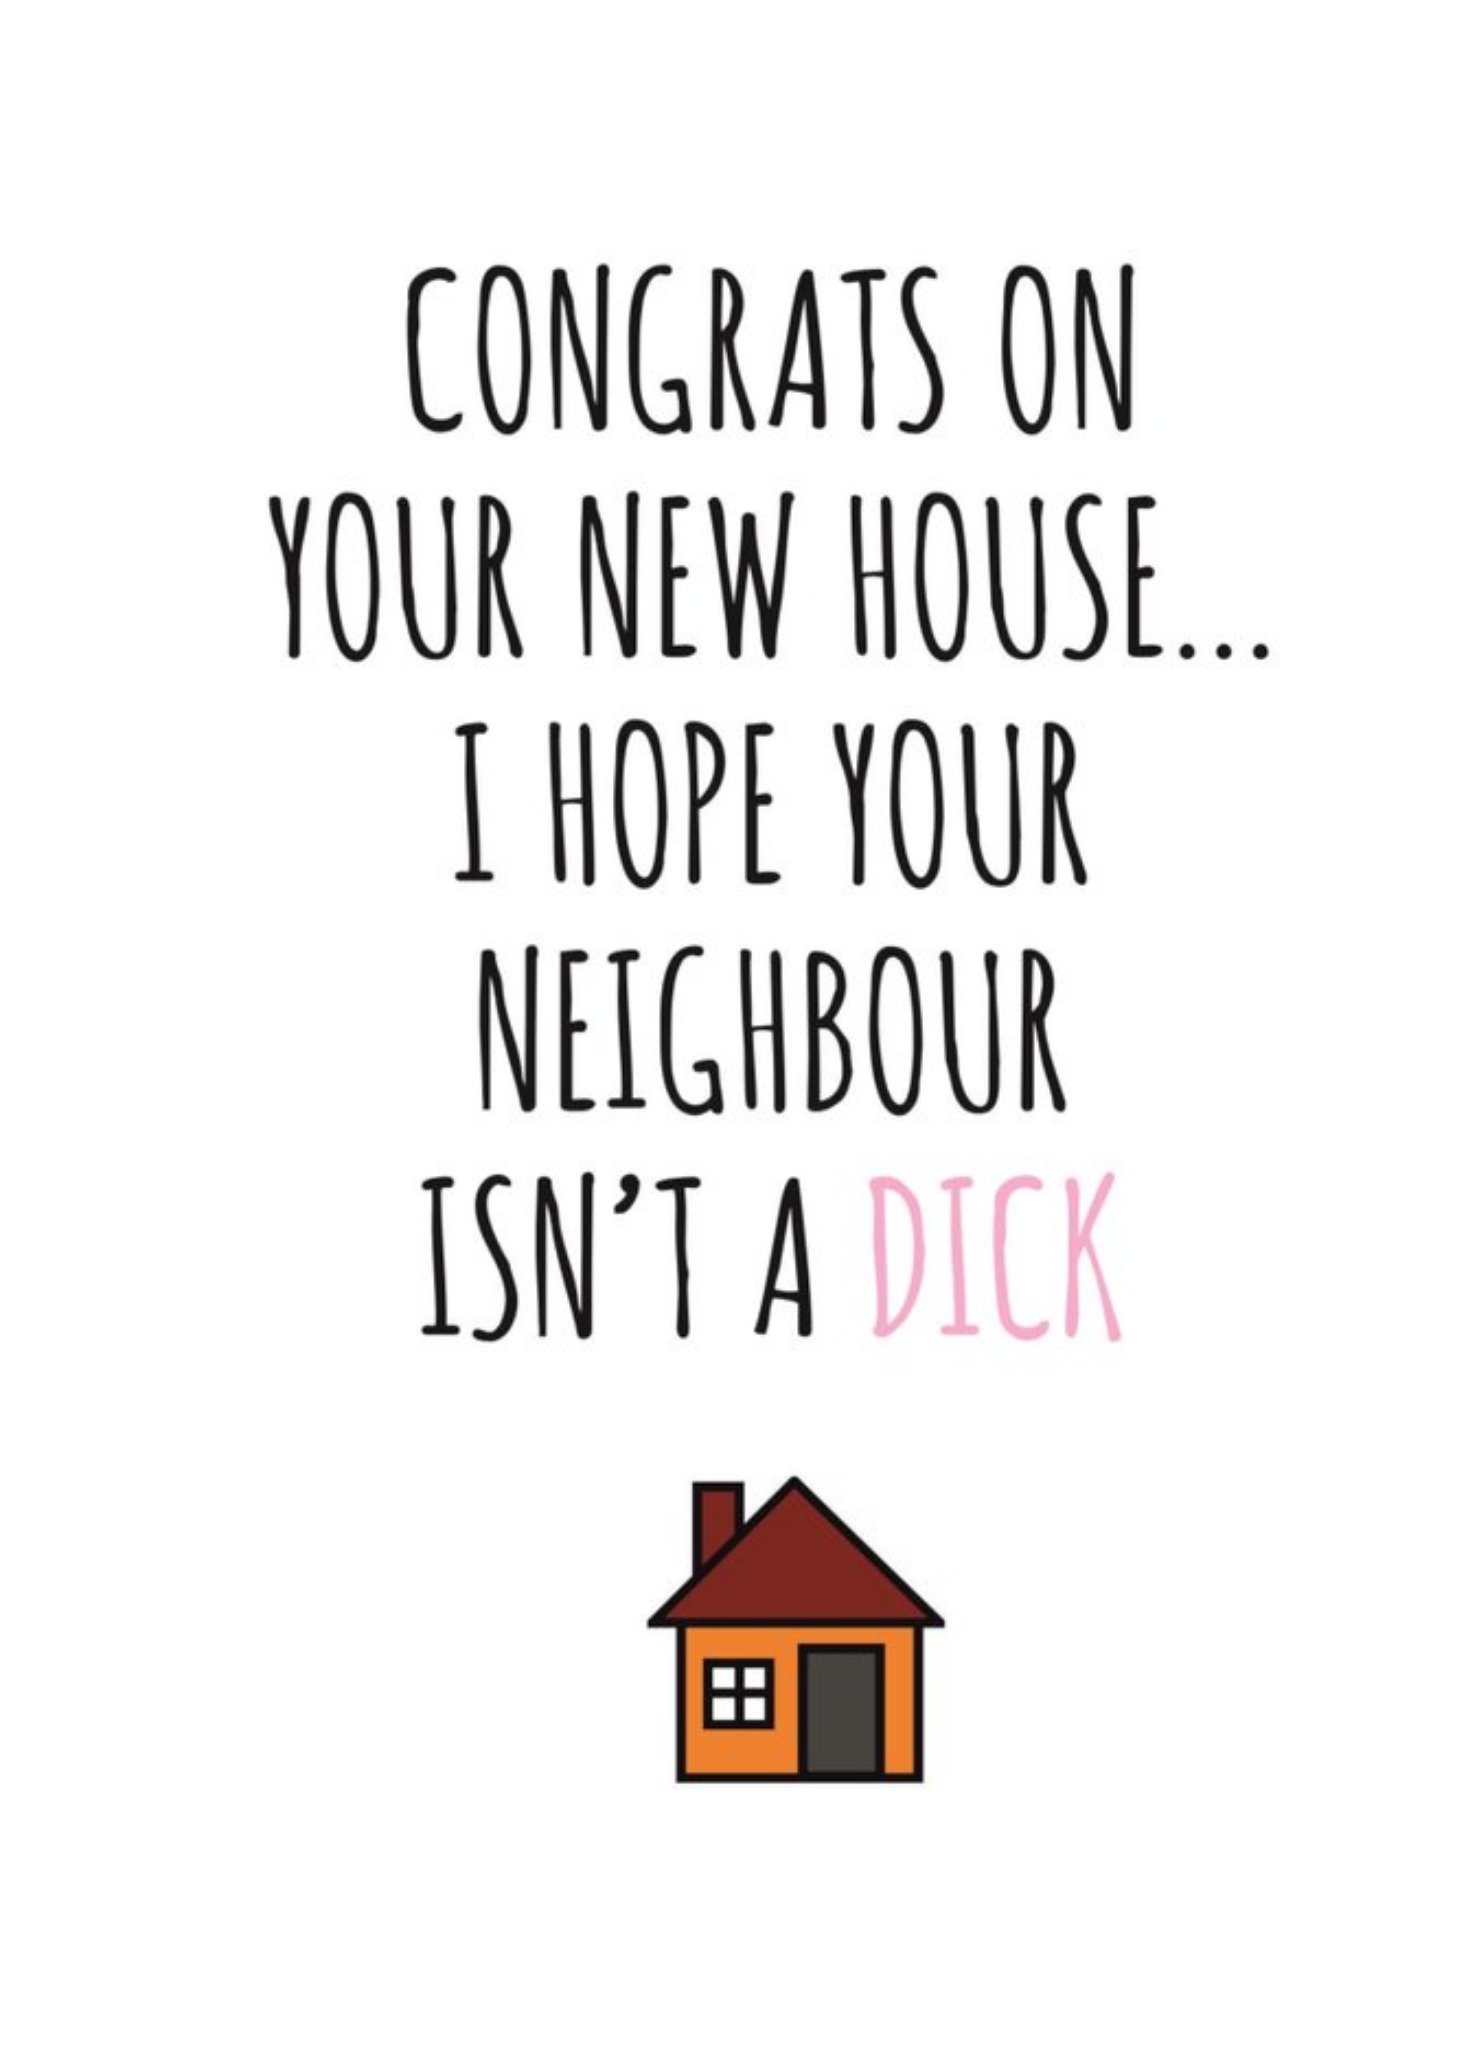 Banter King Typographical Congratulations On Your New House I Hope Your Neighbor Isnt A Dick Card, L